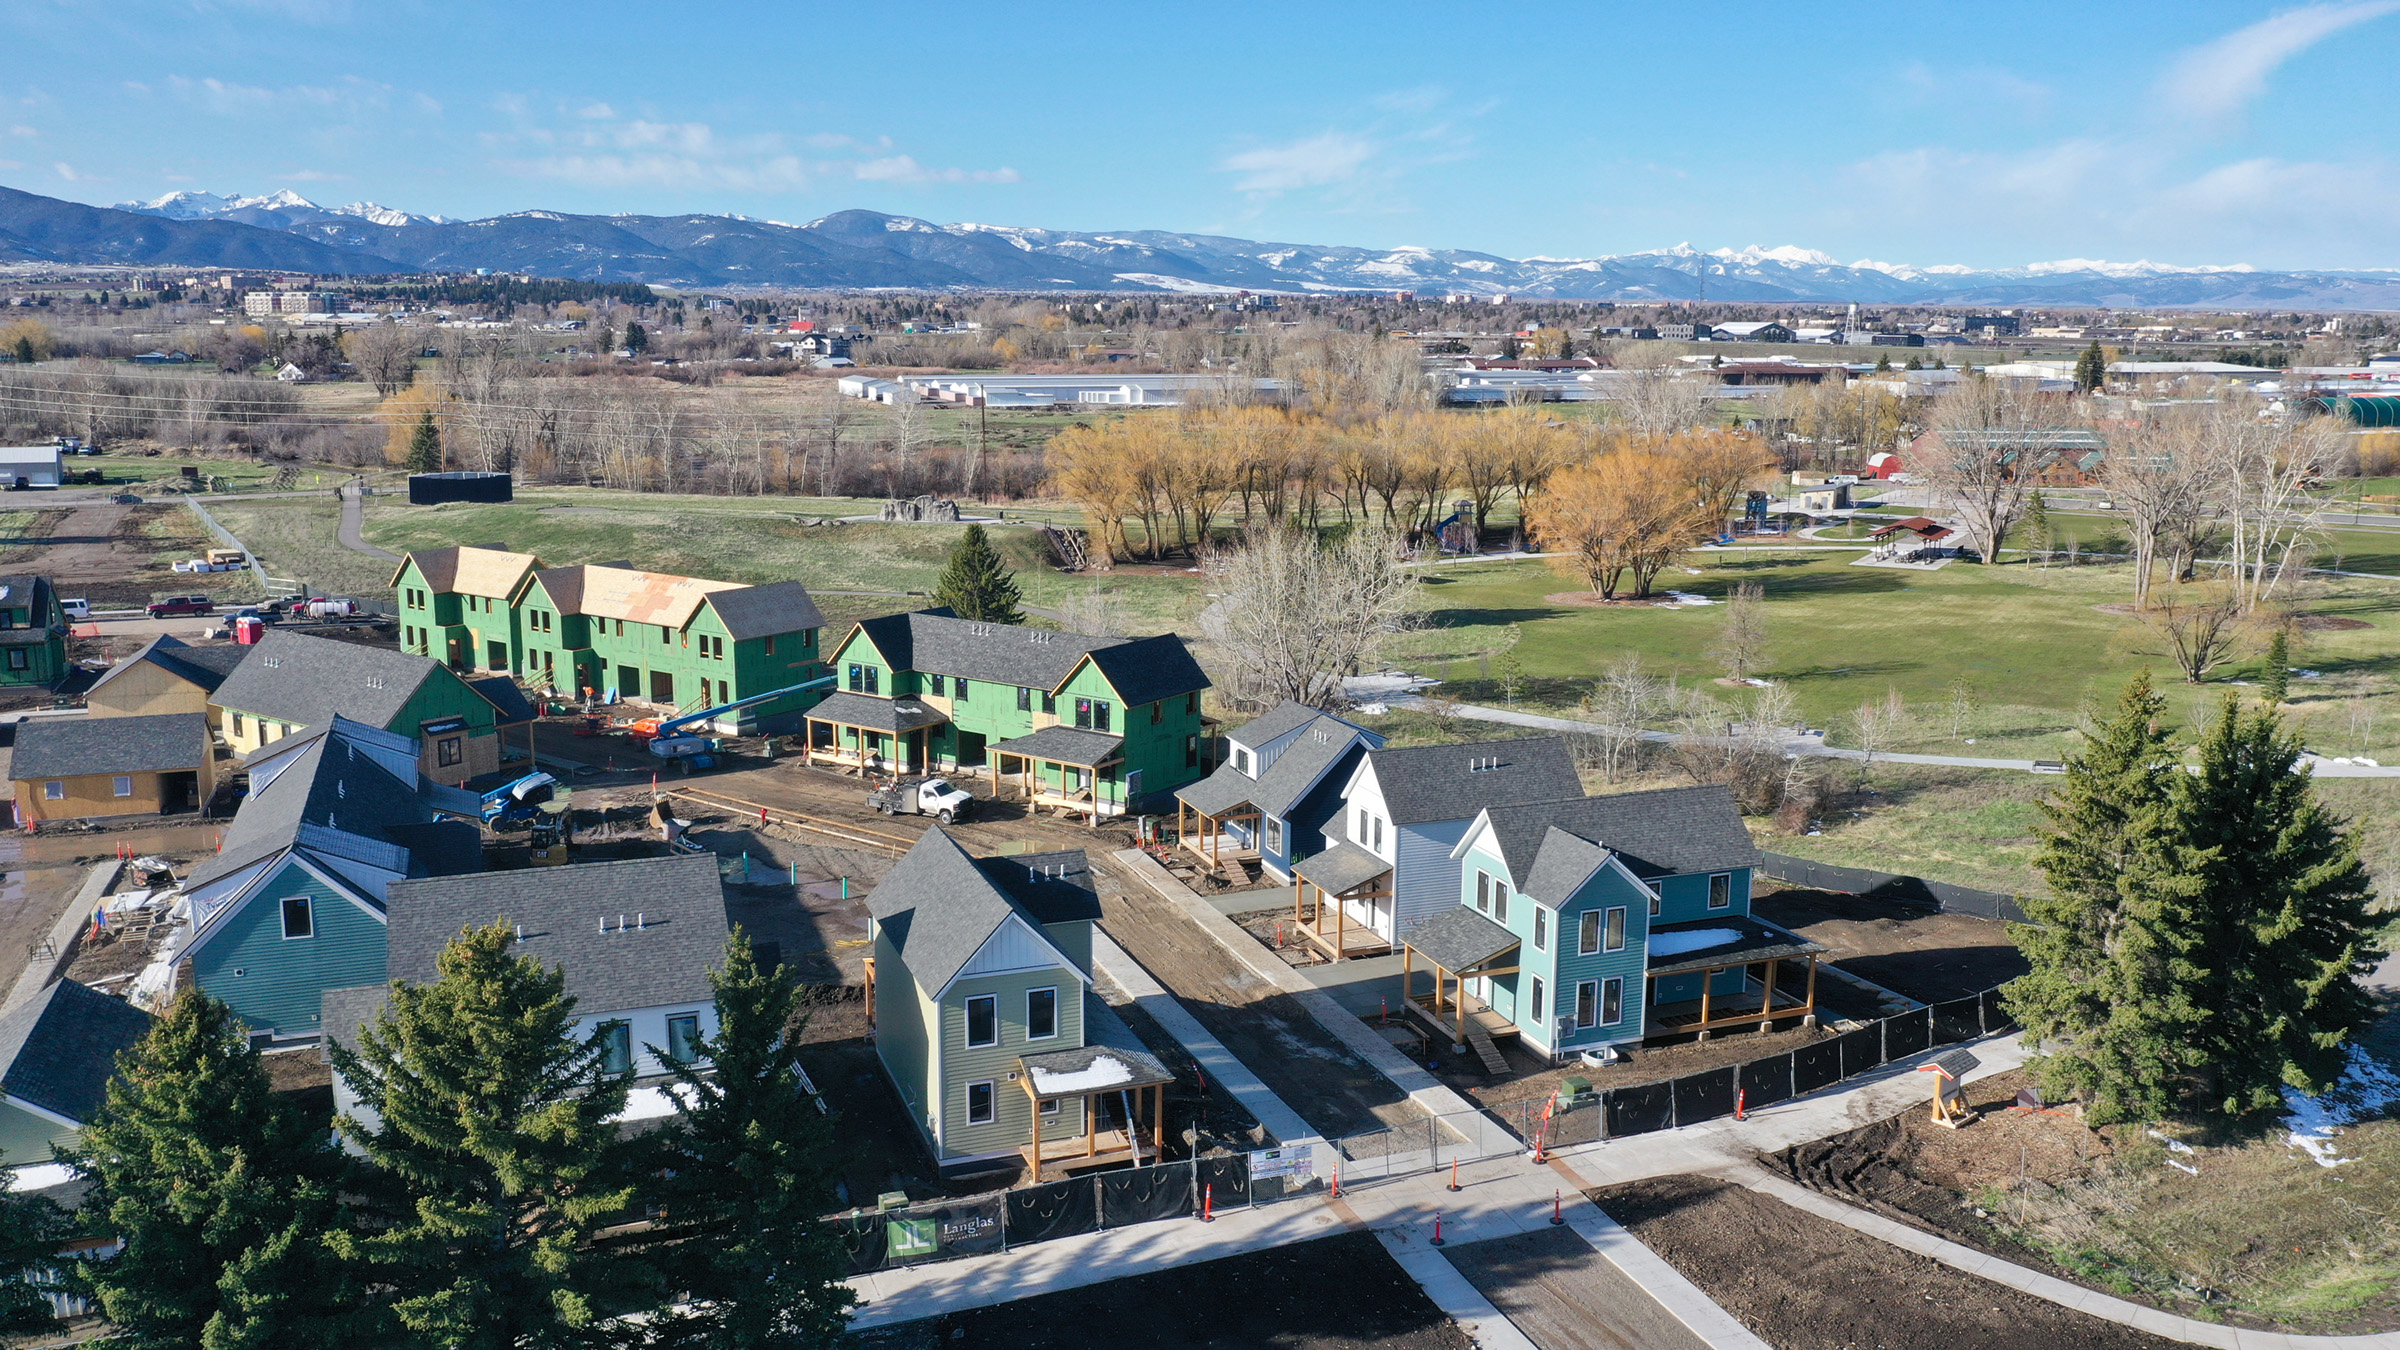 What works in housing affordability: Creating moderate-income housing with the Bridger View neighborhood